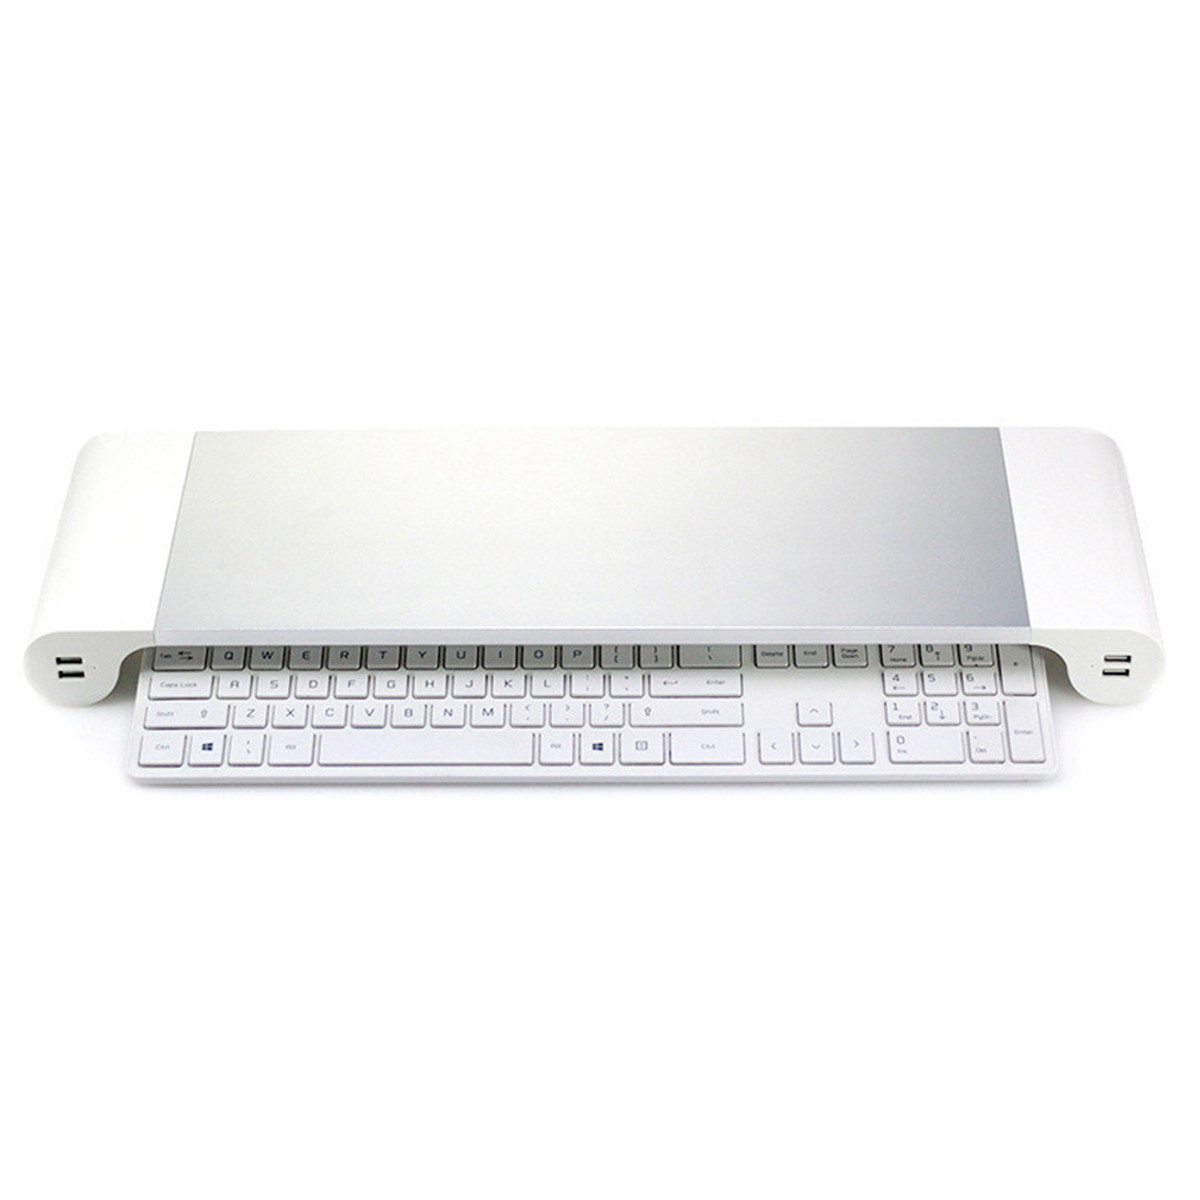 Aluminum-Desktop-Monitor-Stand-Non-slip-Notebook-Laptop-Riser-with-4-ports-USB-charger-for-iMac-MacB-1639044-10